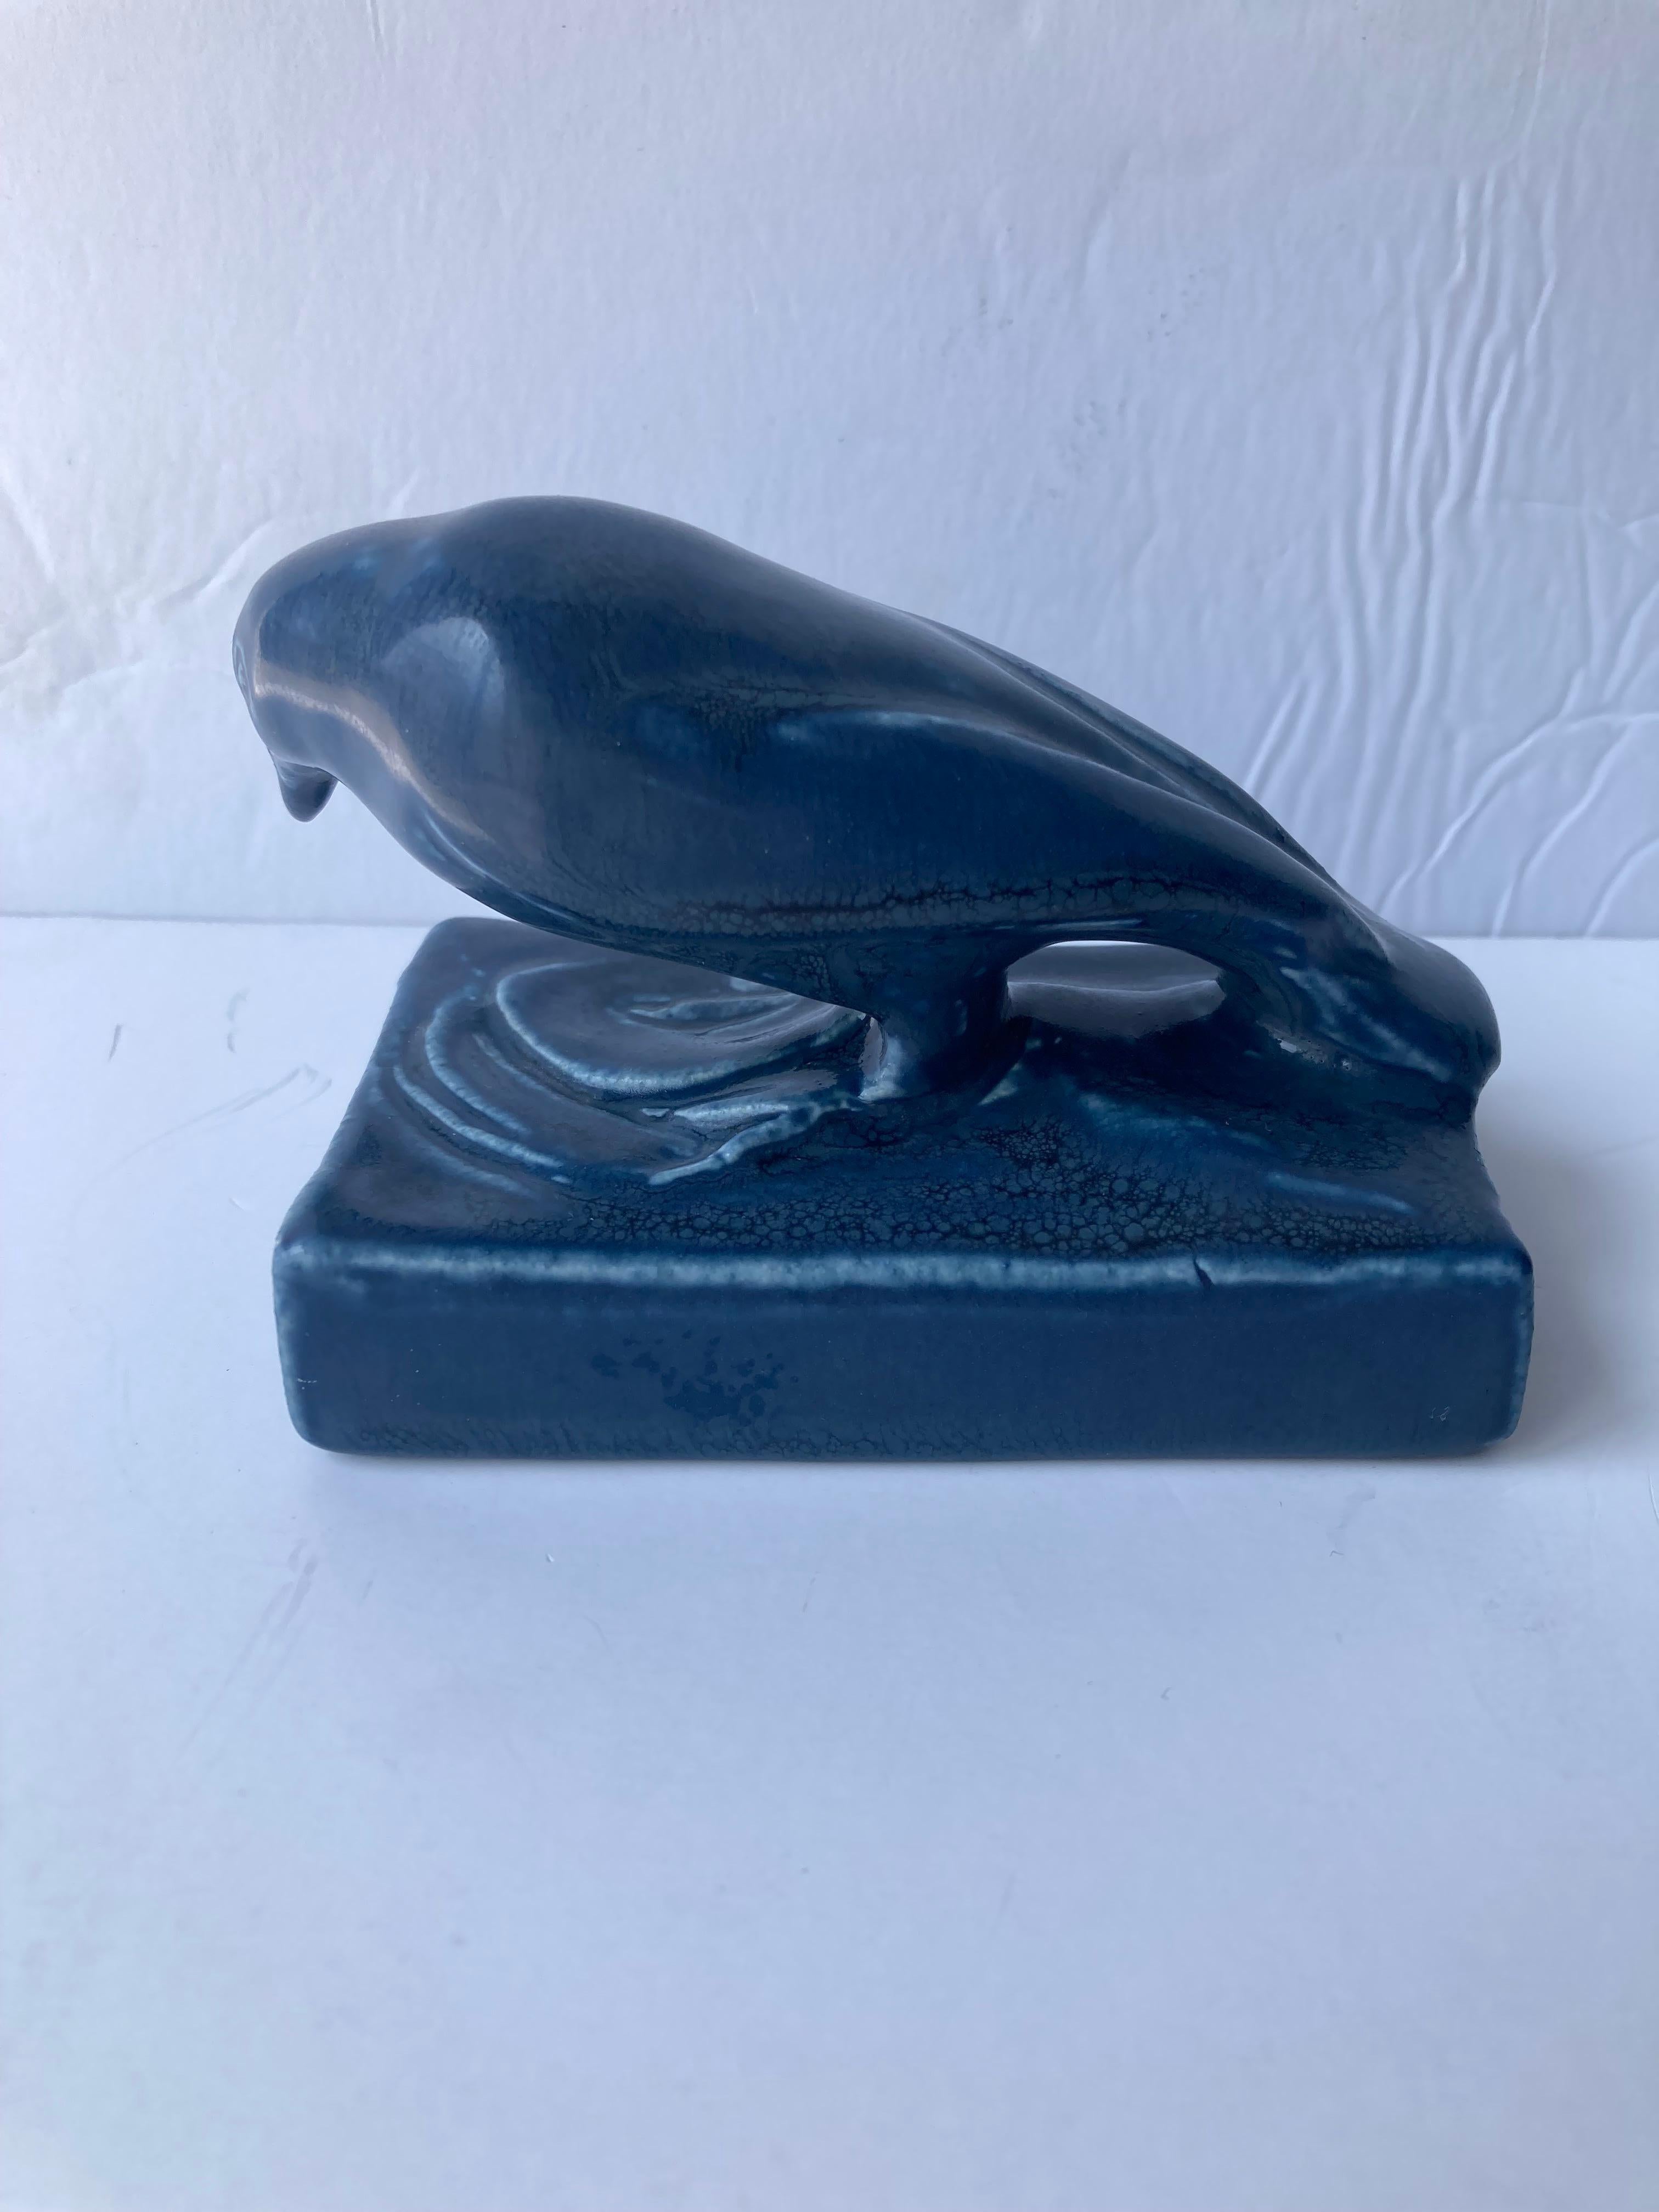 Beautiful Rookwood paperweight of a pottery Rook bird symbol of the Rookwood Pottery Co, model 1623 and dated 1921 in roman numbers XXI. Plus flame Mark.